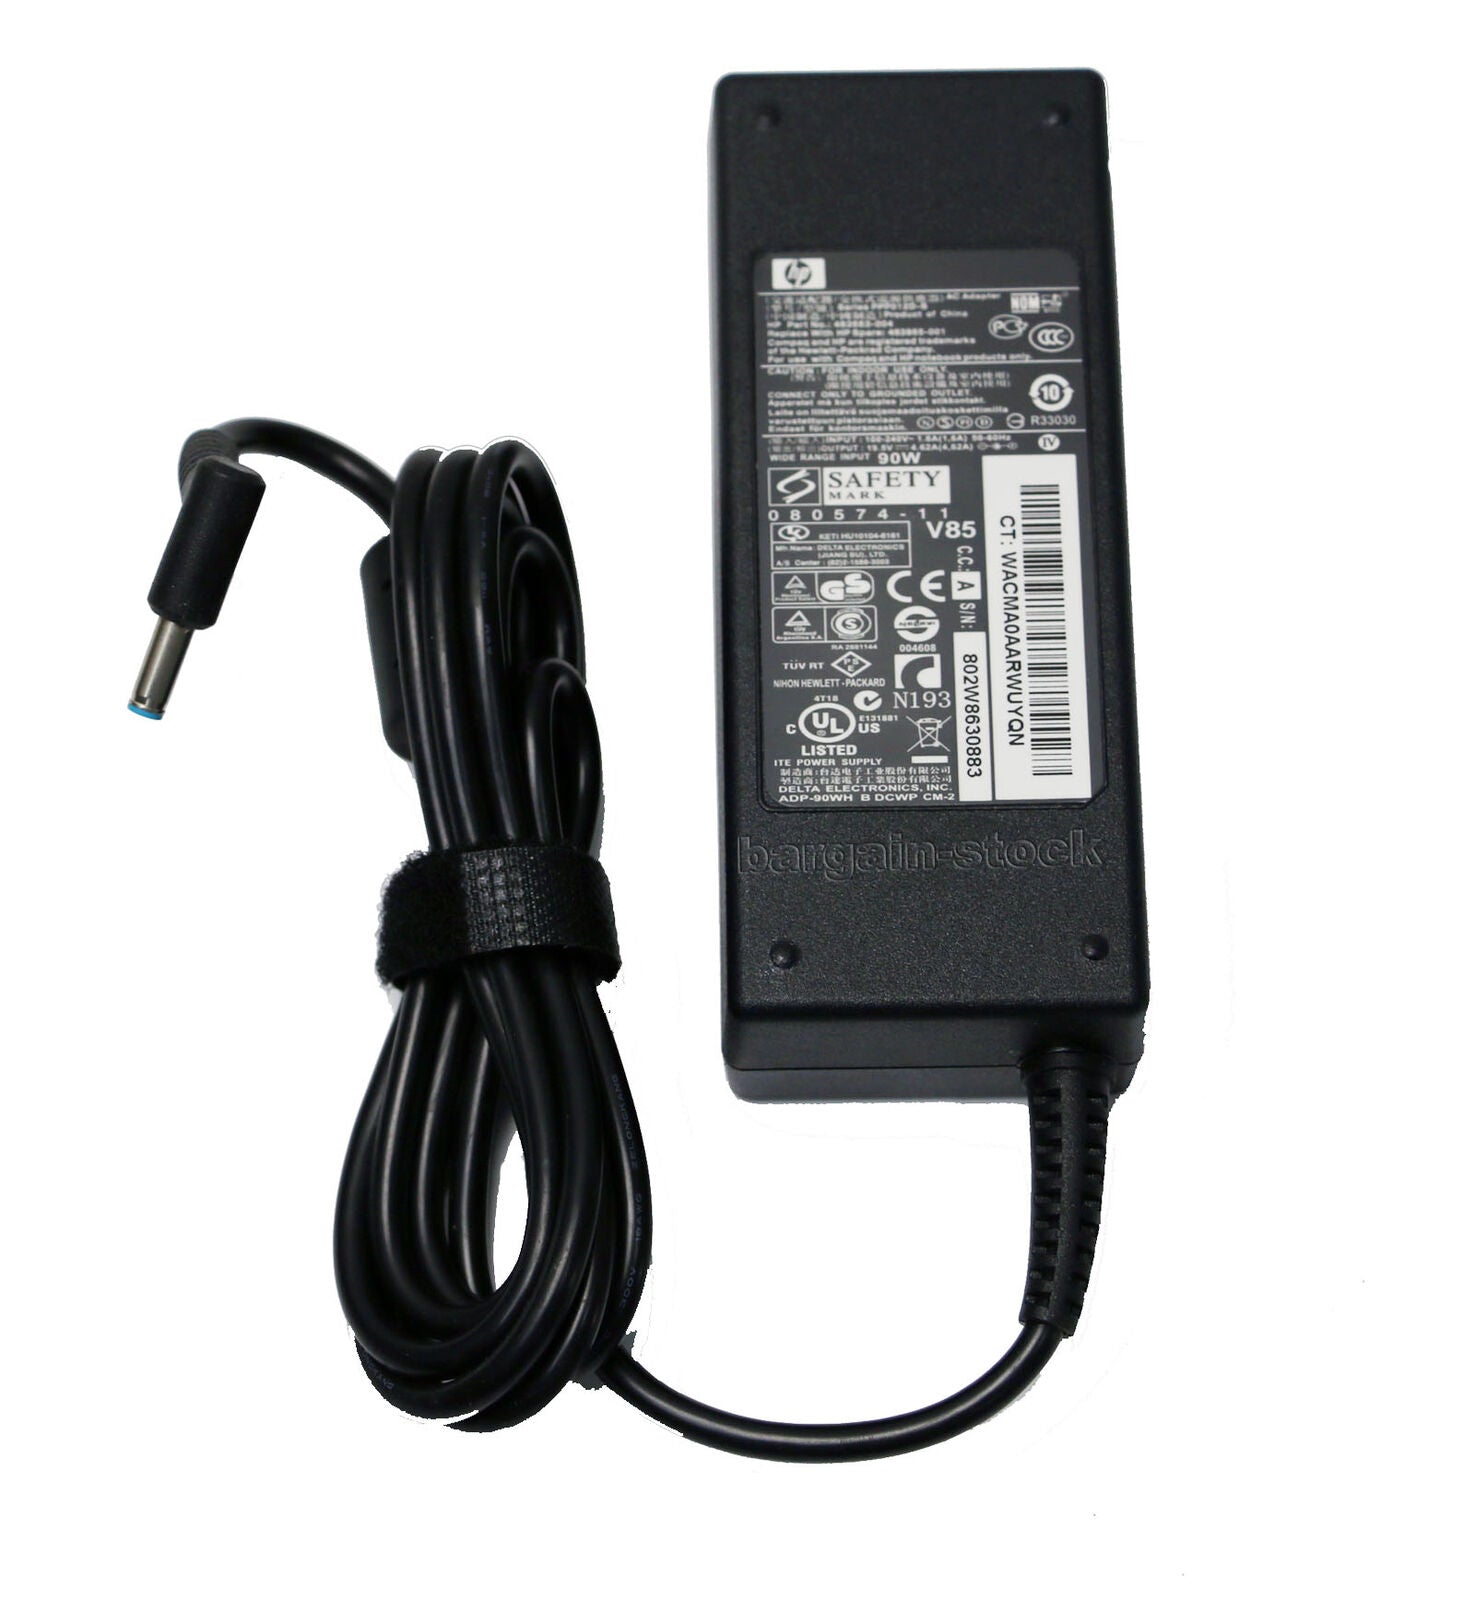 NEW Original AC Adapter Charger For HP 250 G2 250 G3 255 G2 15-k002ne 19V 4.62A 90W Charger